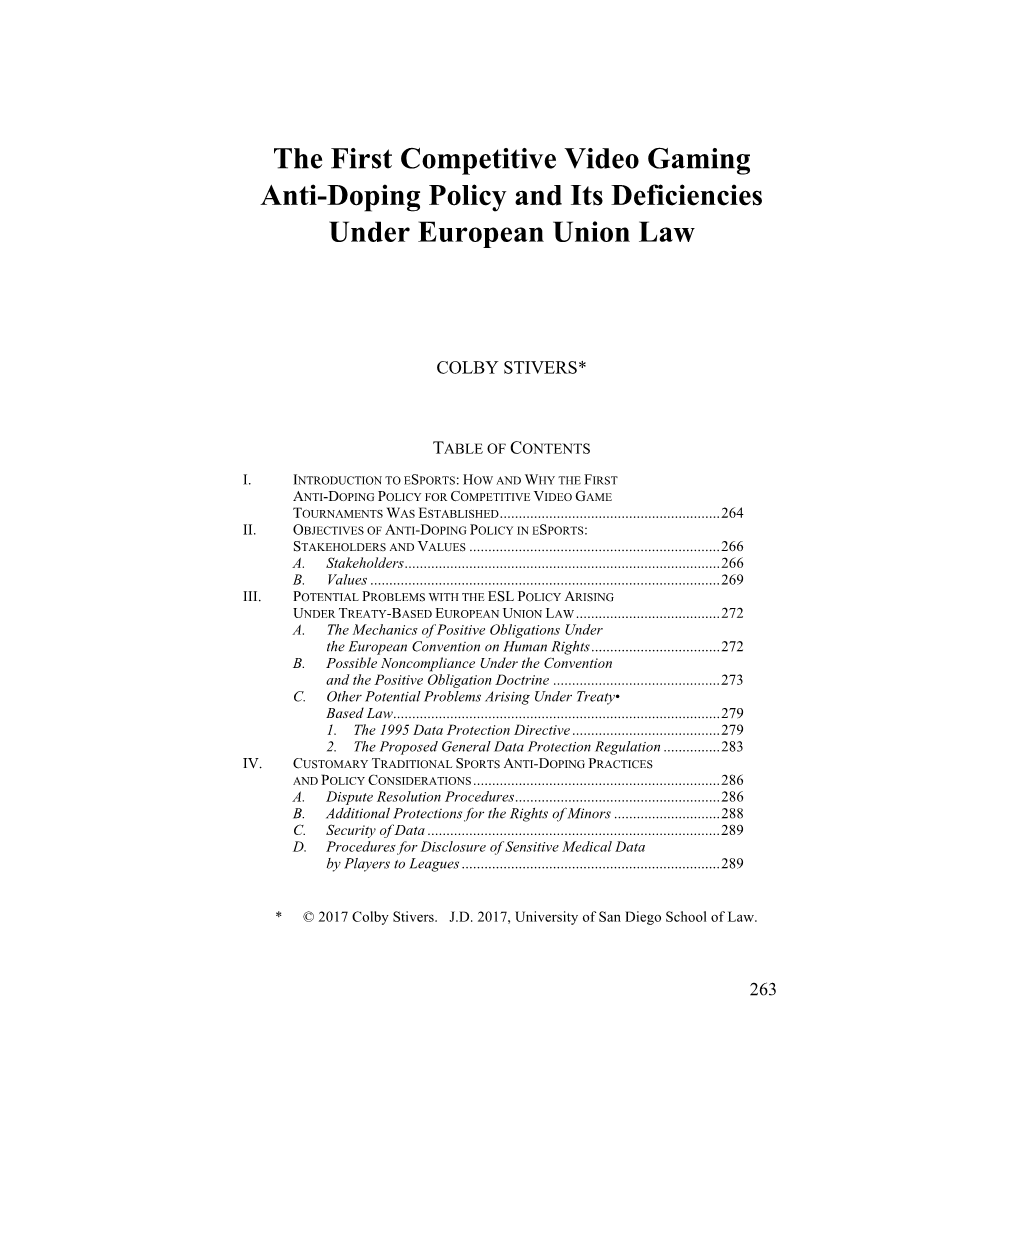 The First Competitive Video Gaming Anti-Doping Policy and Its Deficiencies Under European Union Law